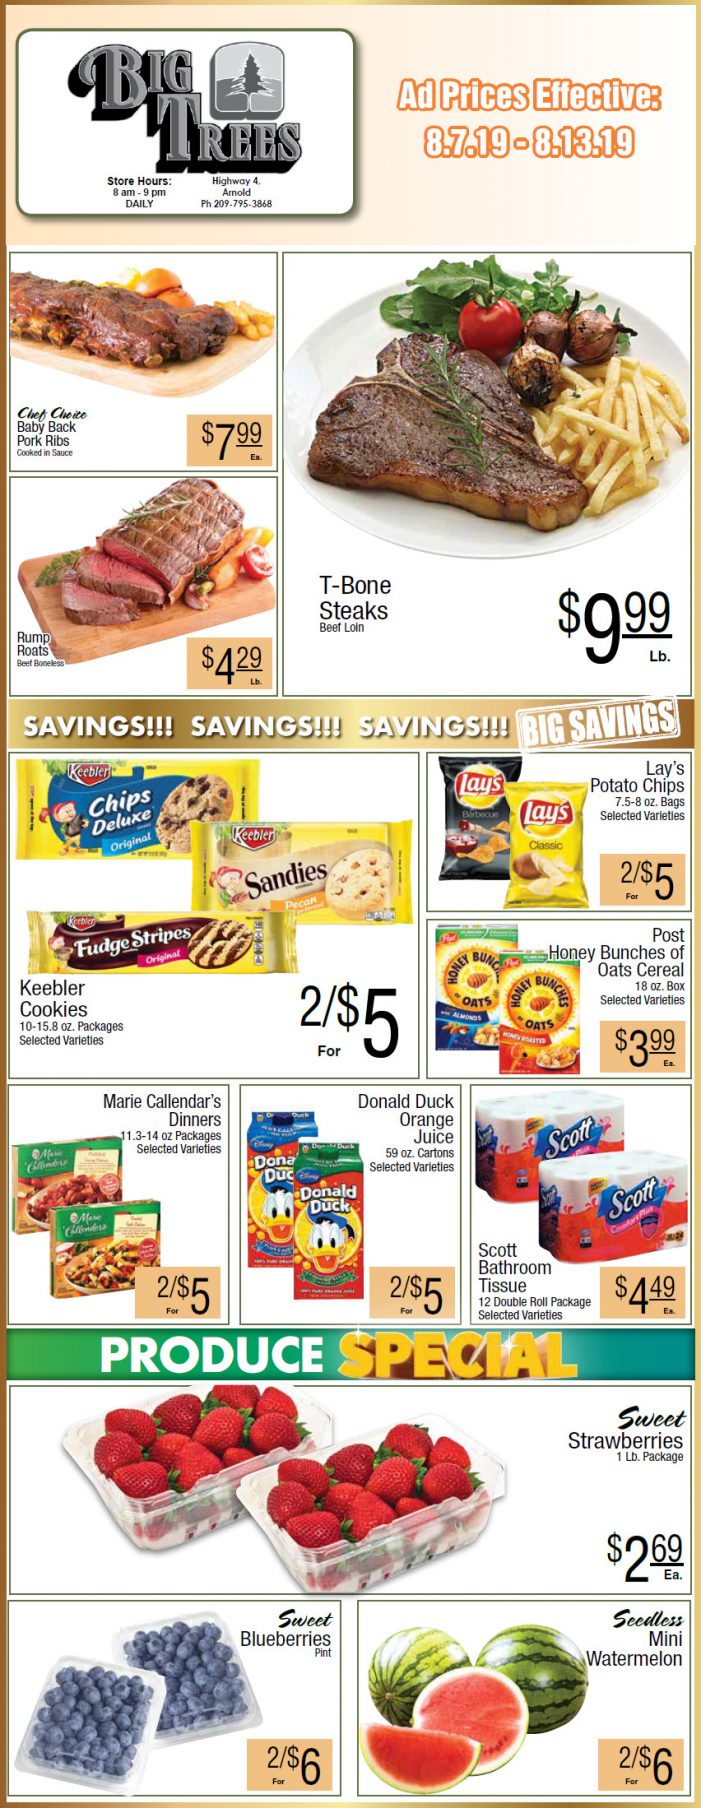 Big Trees Market Weekly Ad & Grocery Specials Through August 13th